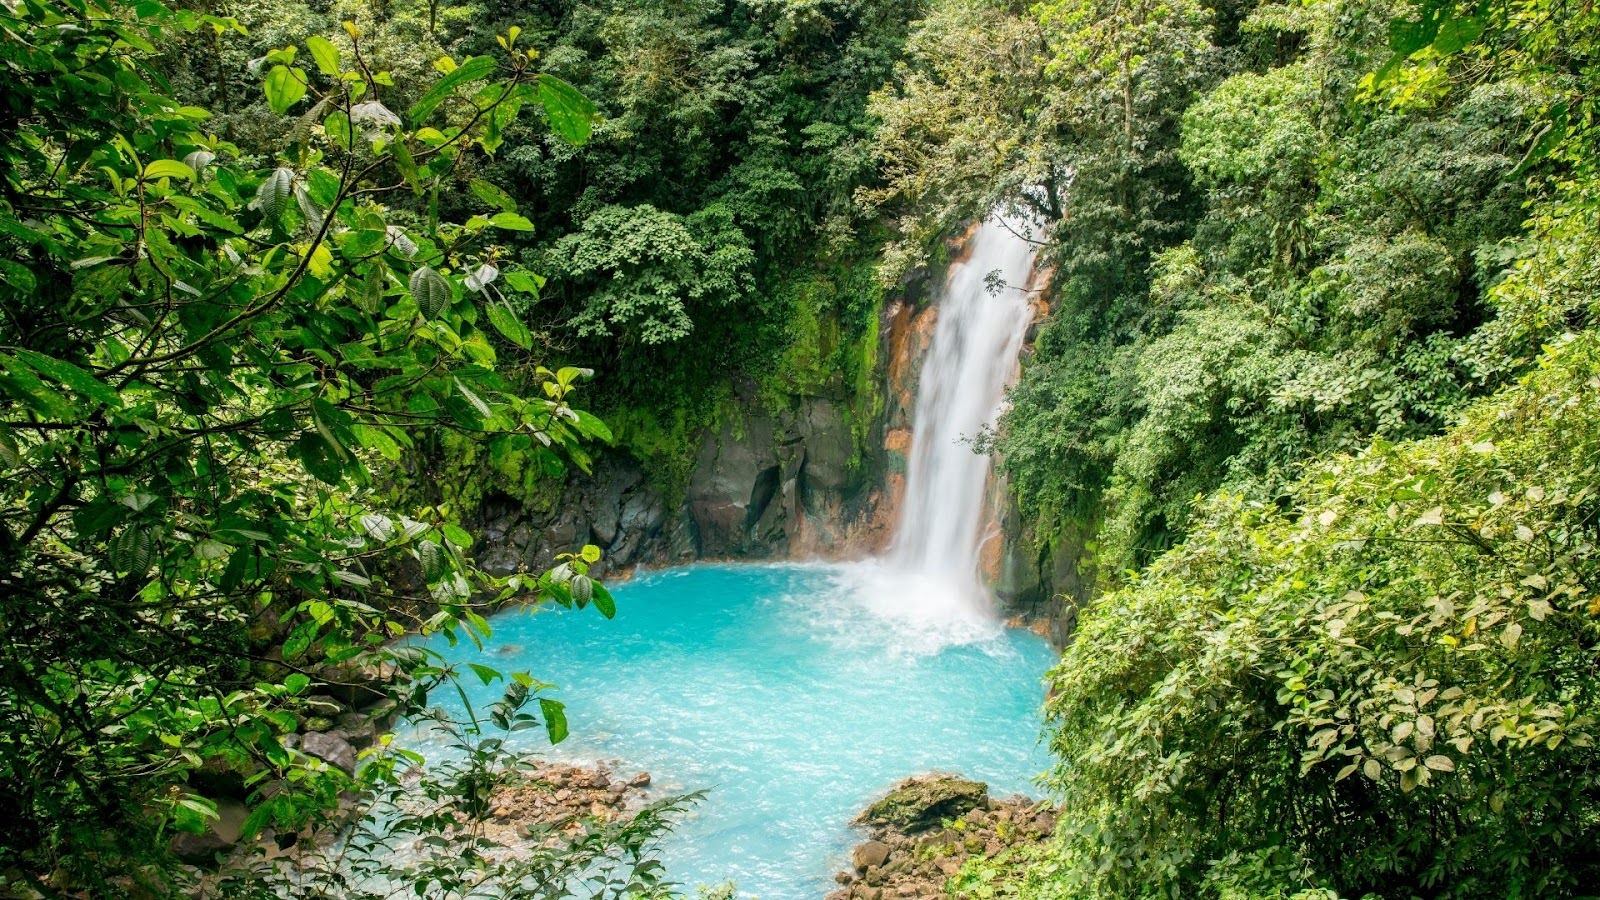 Costa Rica - Top 10 Warm Vacation Spots to Visit in December